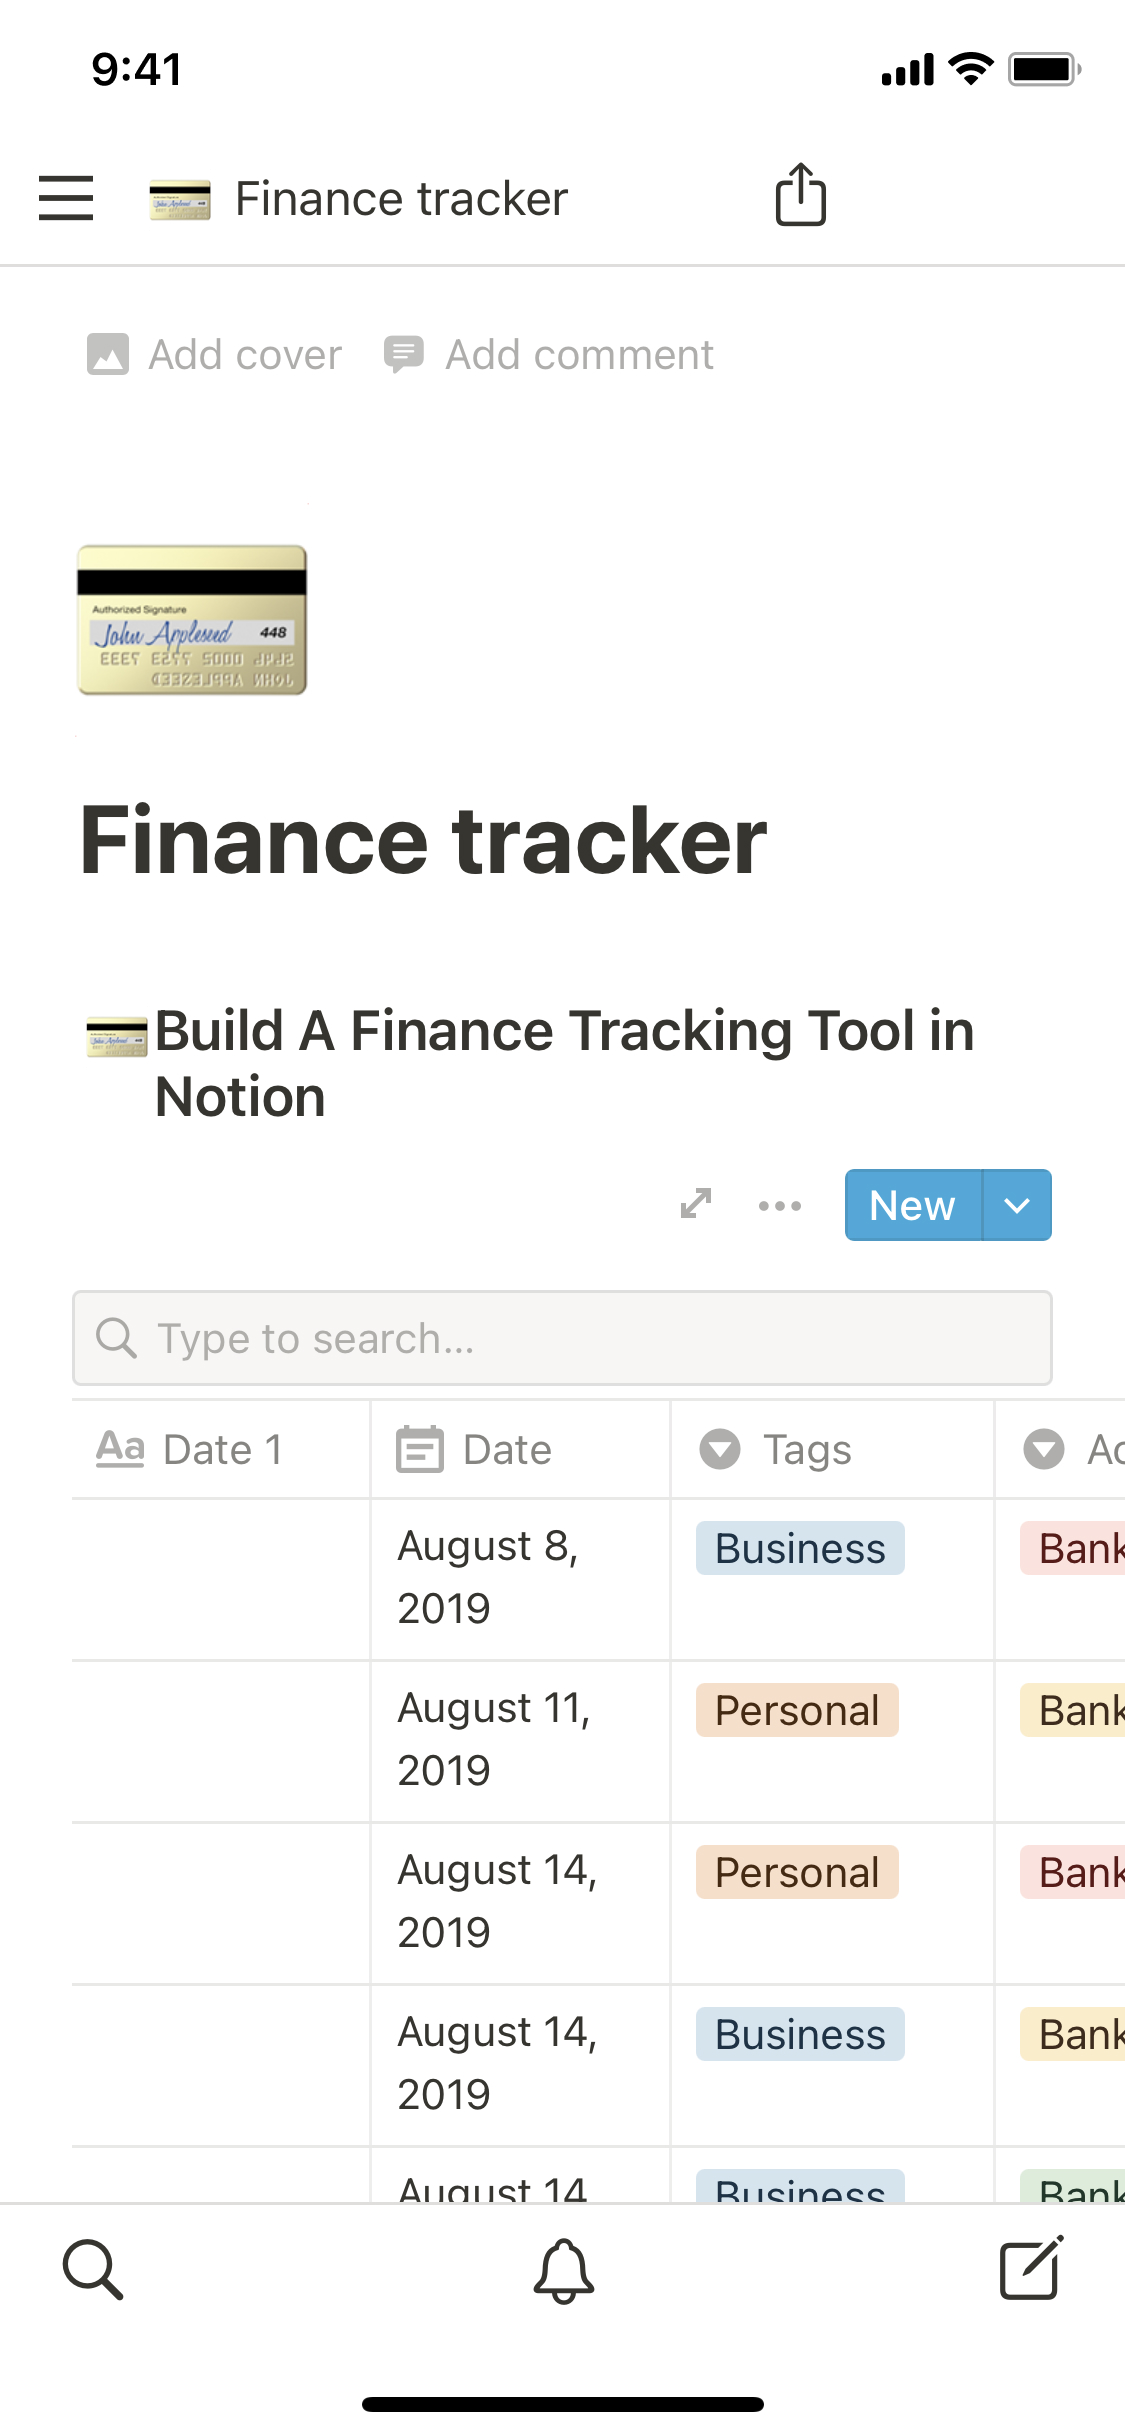 The mobile image for the Finance tracker template